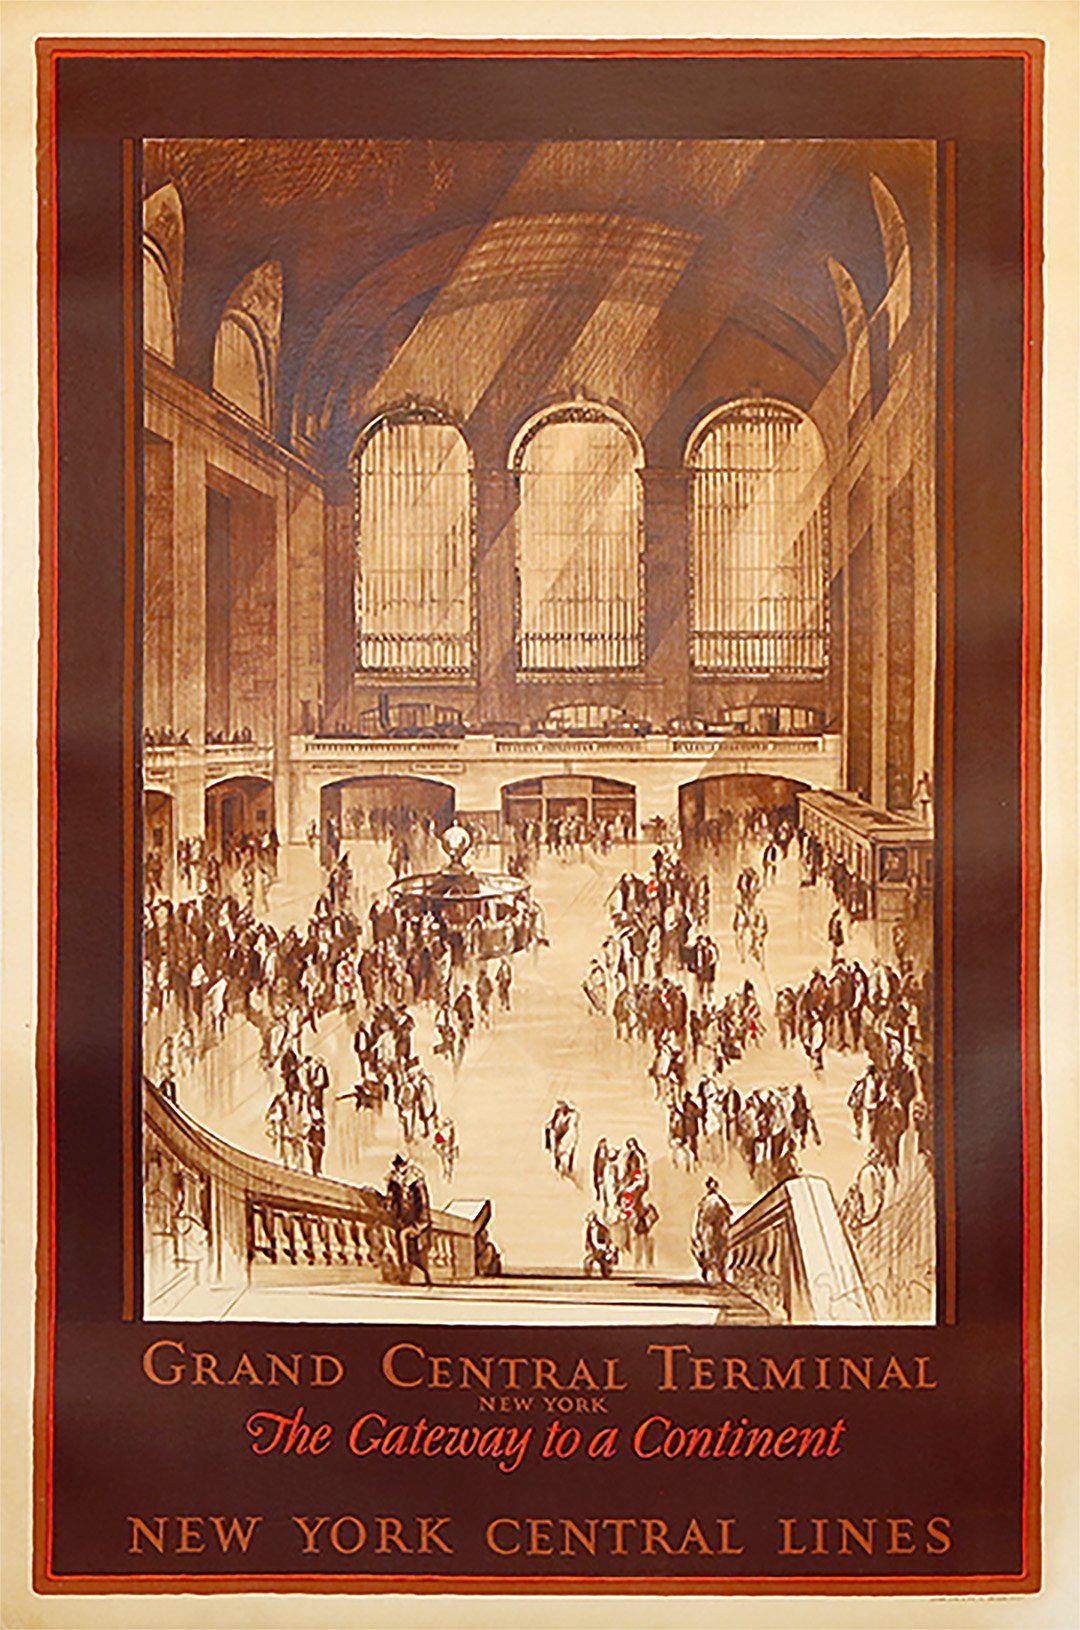 Original Grand Central Terminal Vintage Poster New York Central Lines by Earl Horter c1927